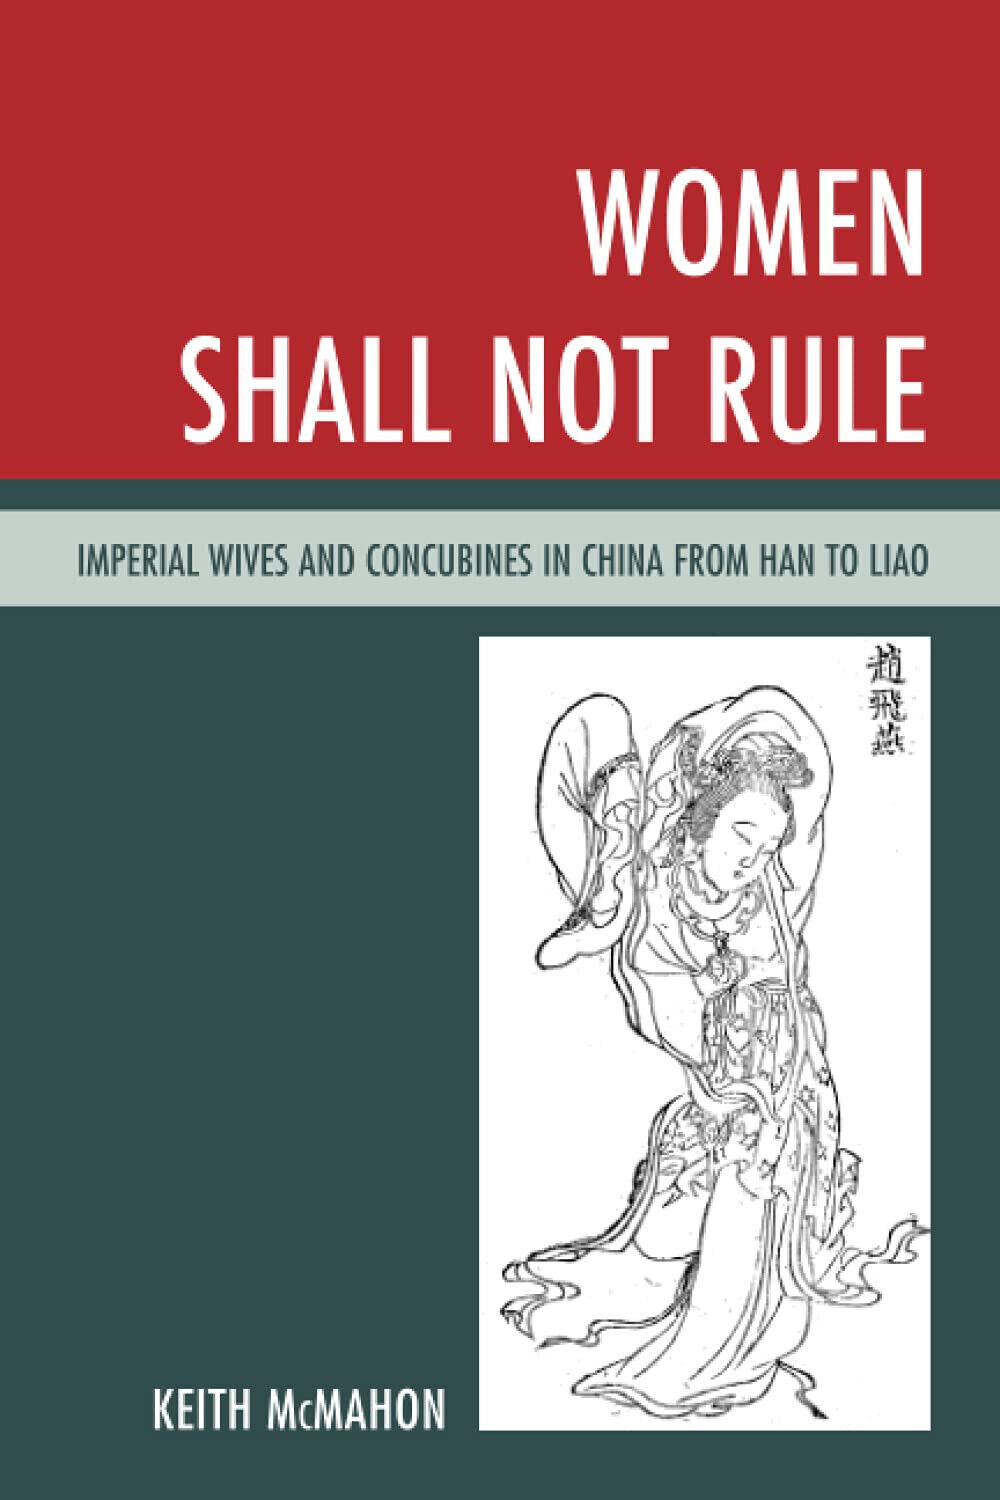 Women Shall Not Rule - Keith McMahon - Rowman & Littlefield, 2020